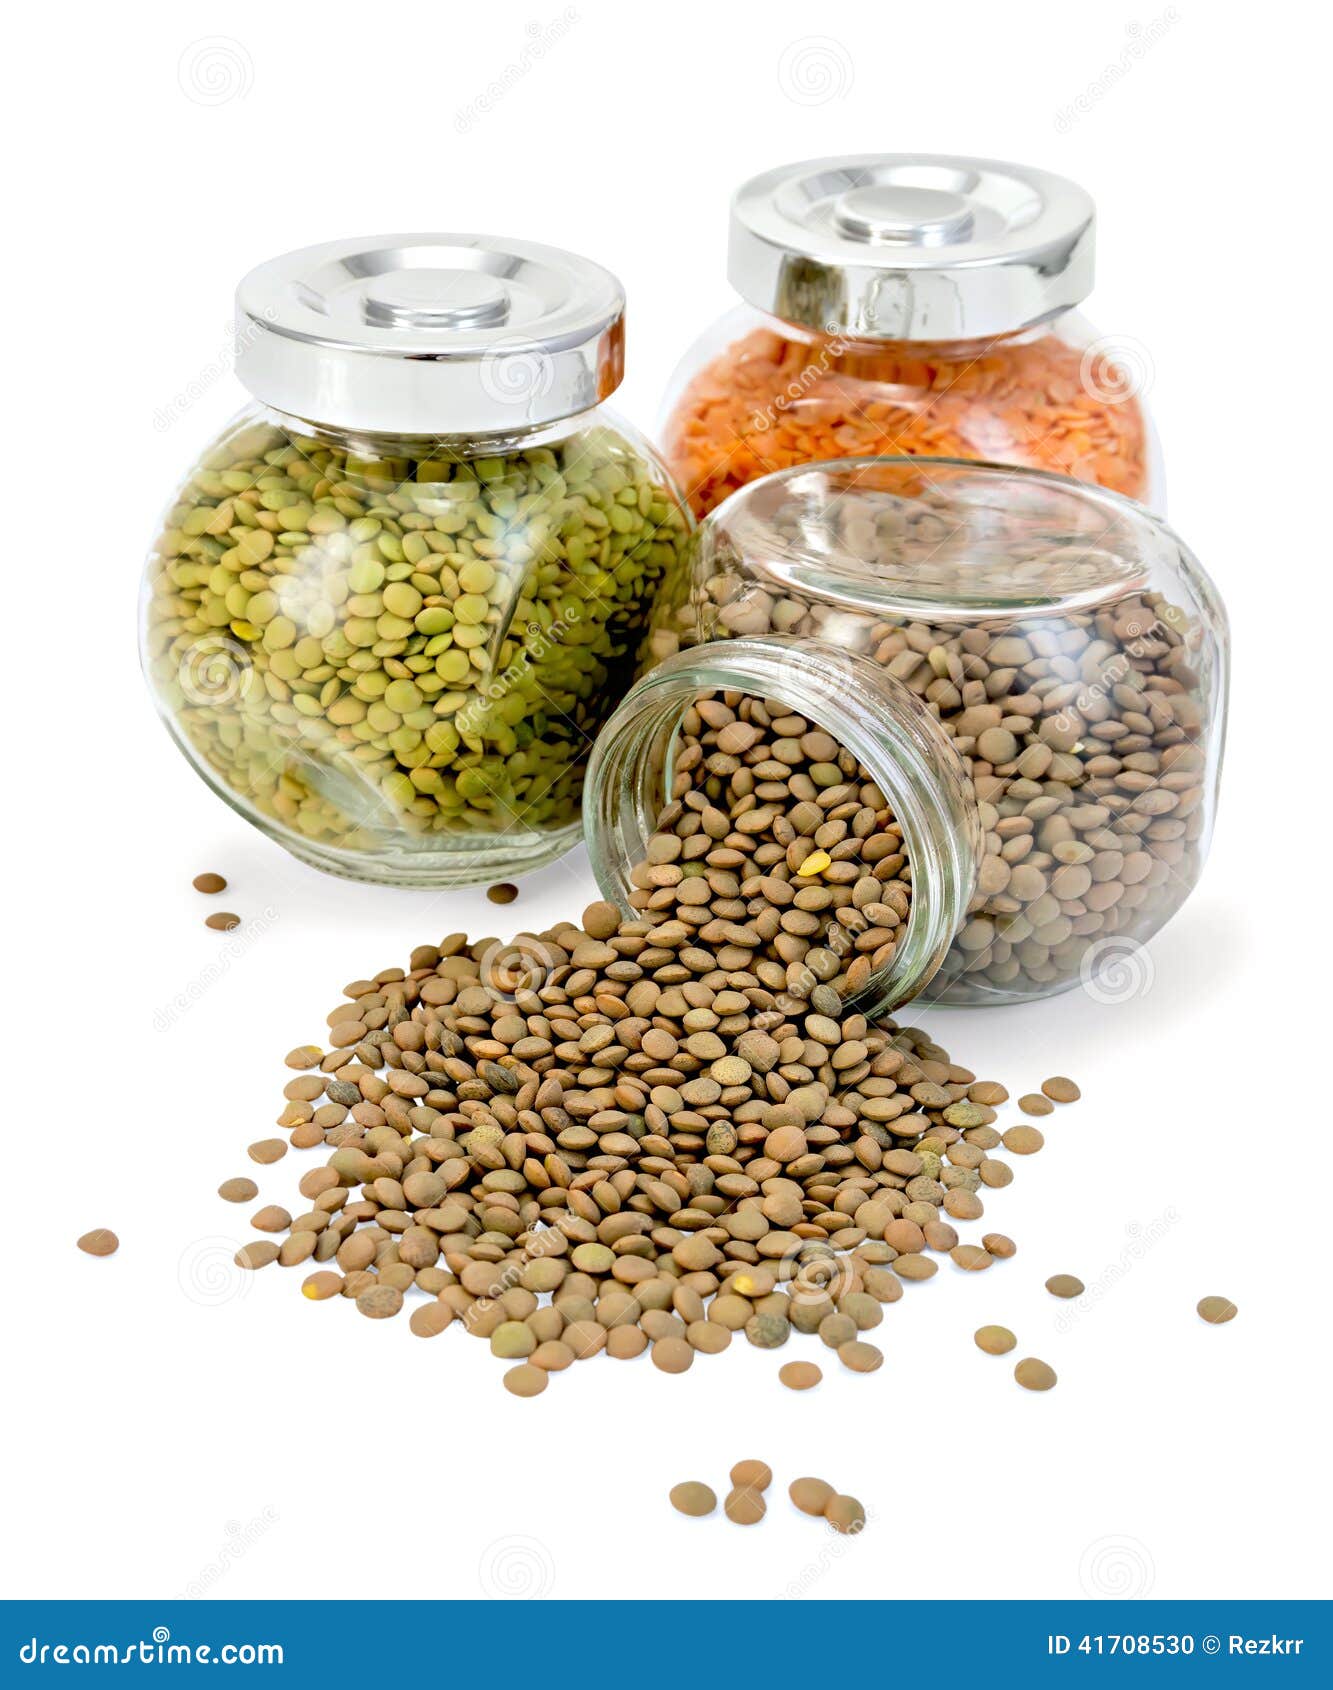 Lentil different in jars stock photo. Image of close - 41708530